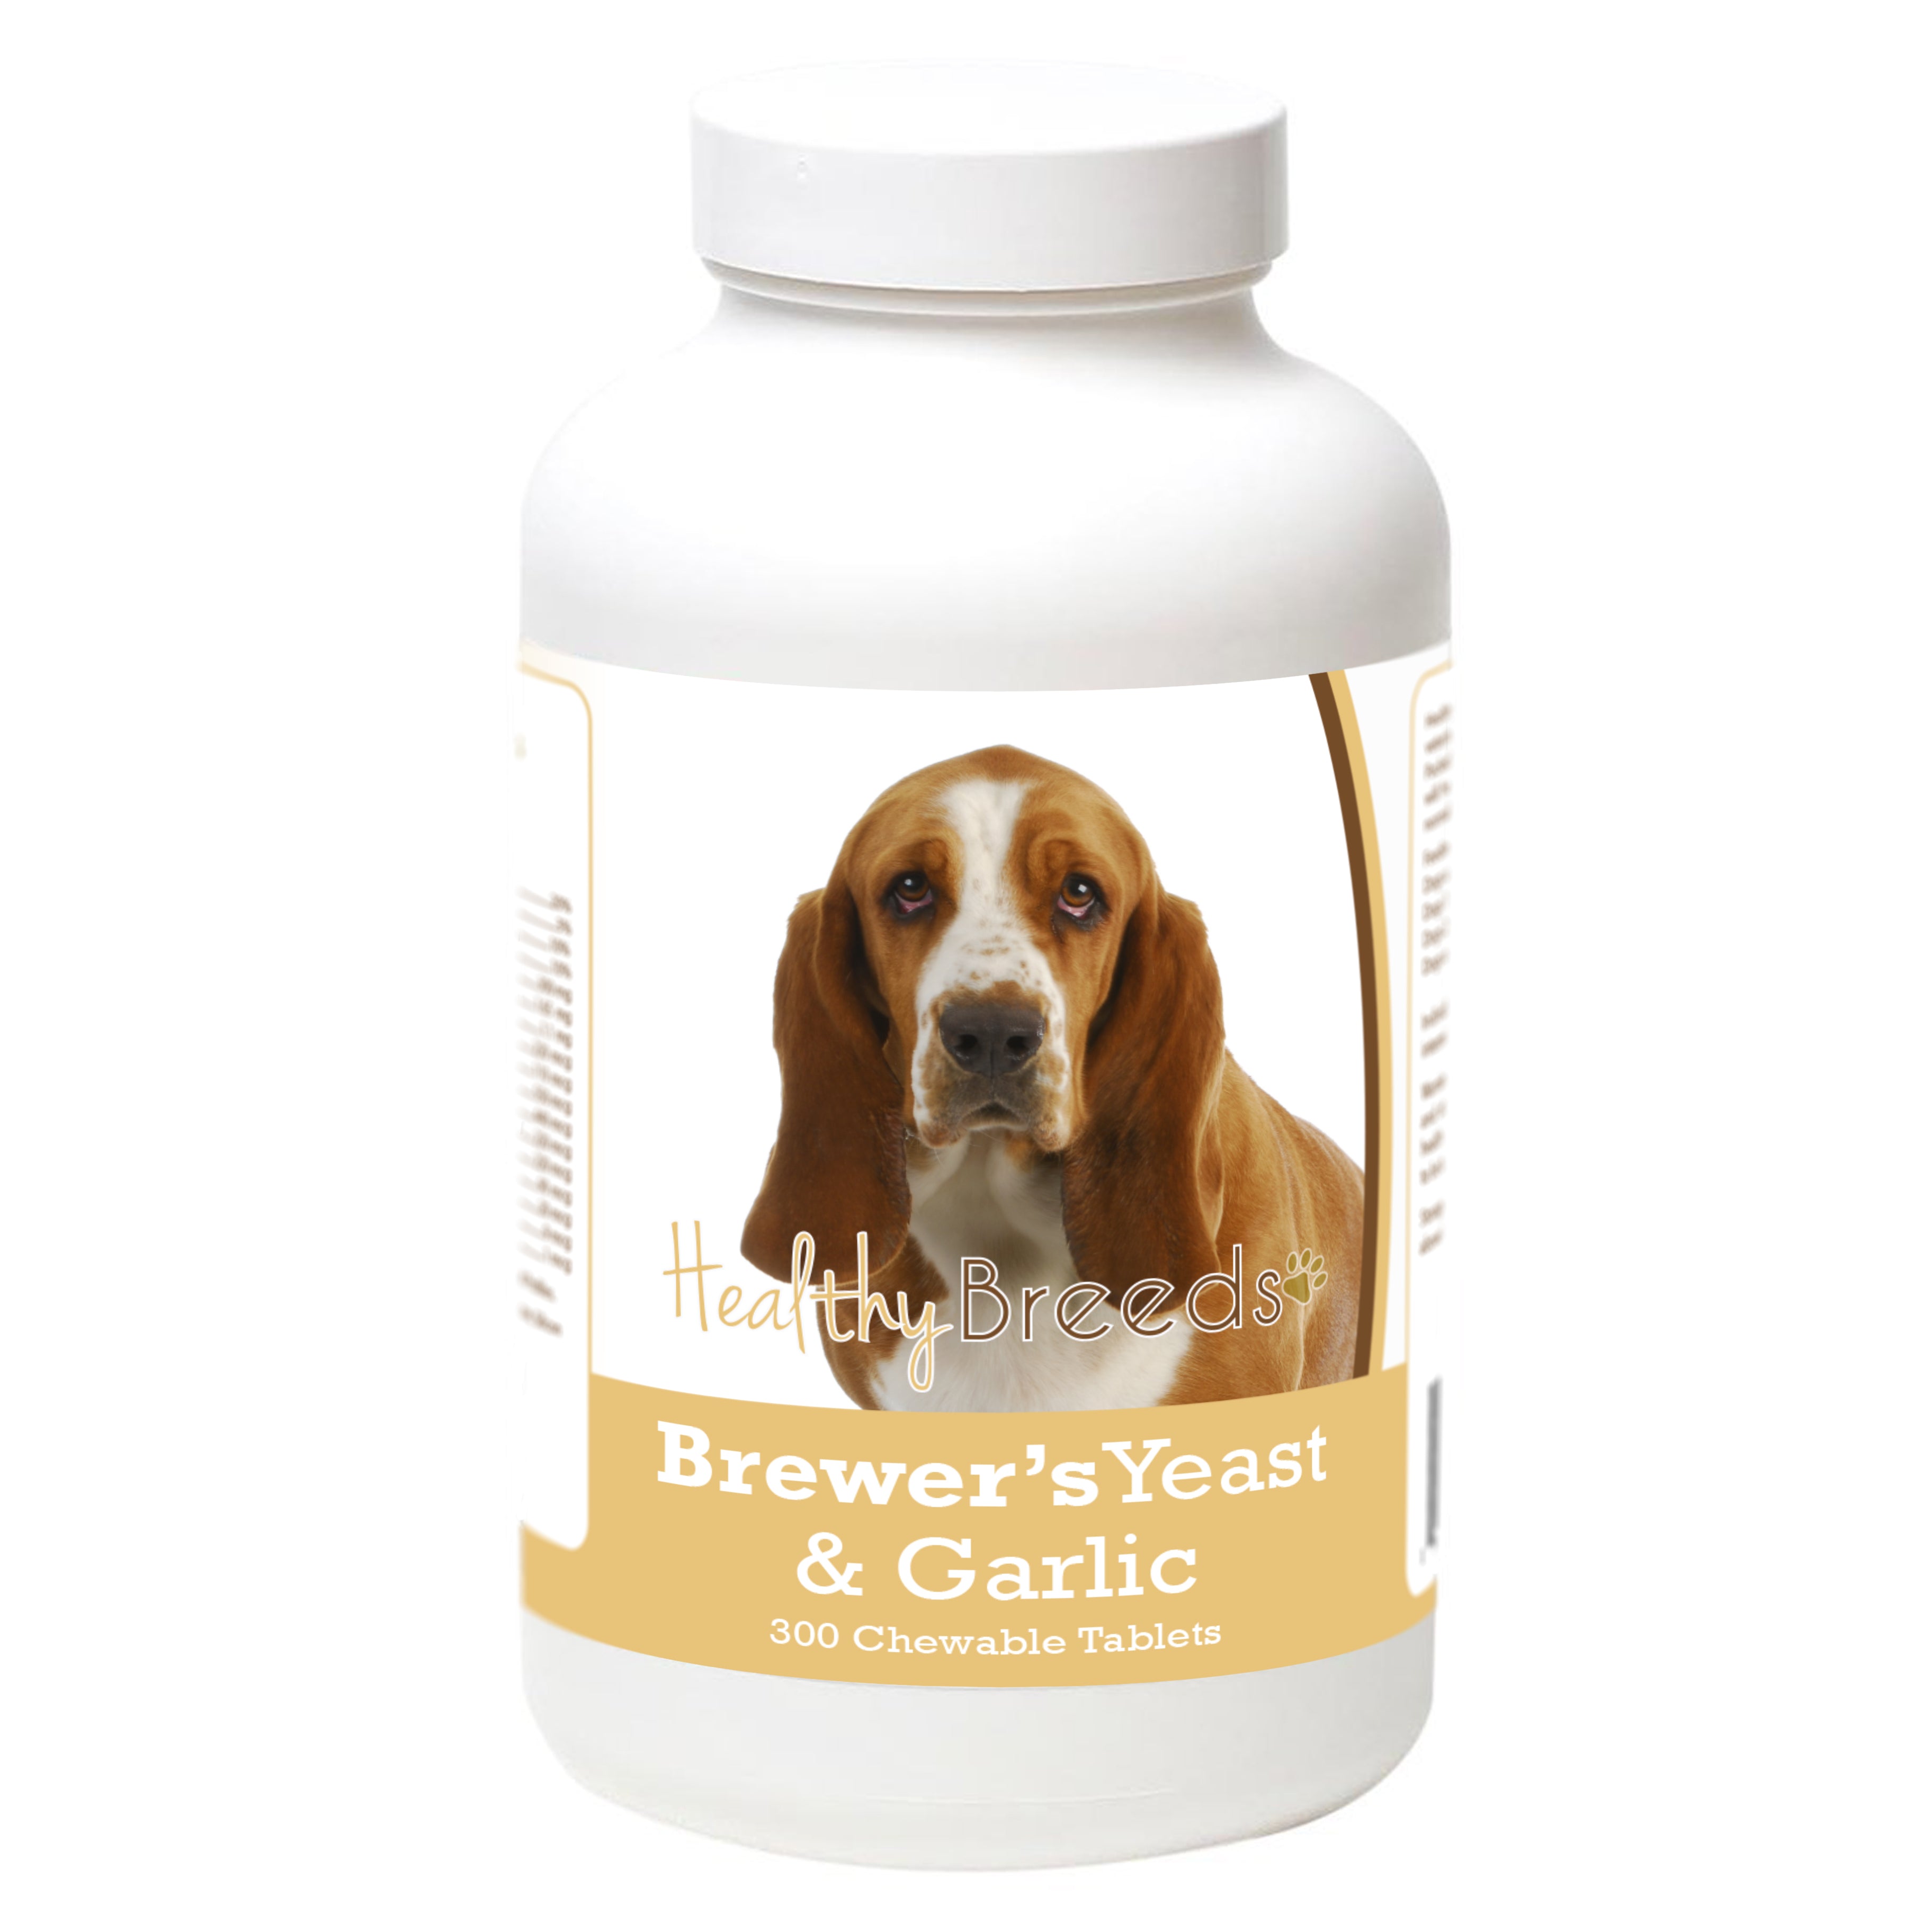 Basset Hound Brewers Yeast Tablets 300 Count